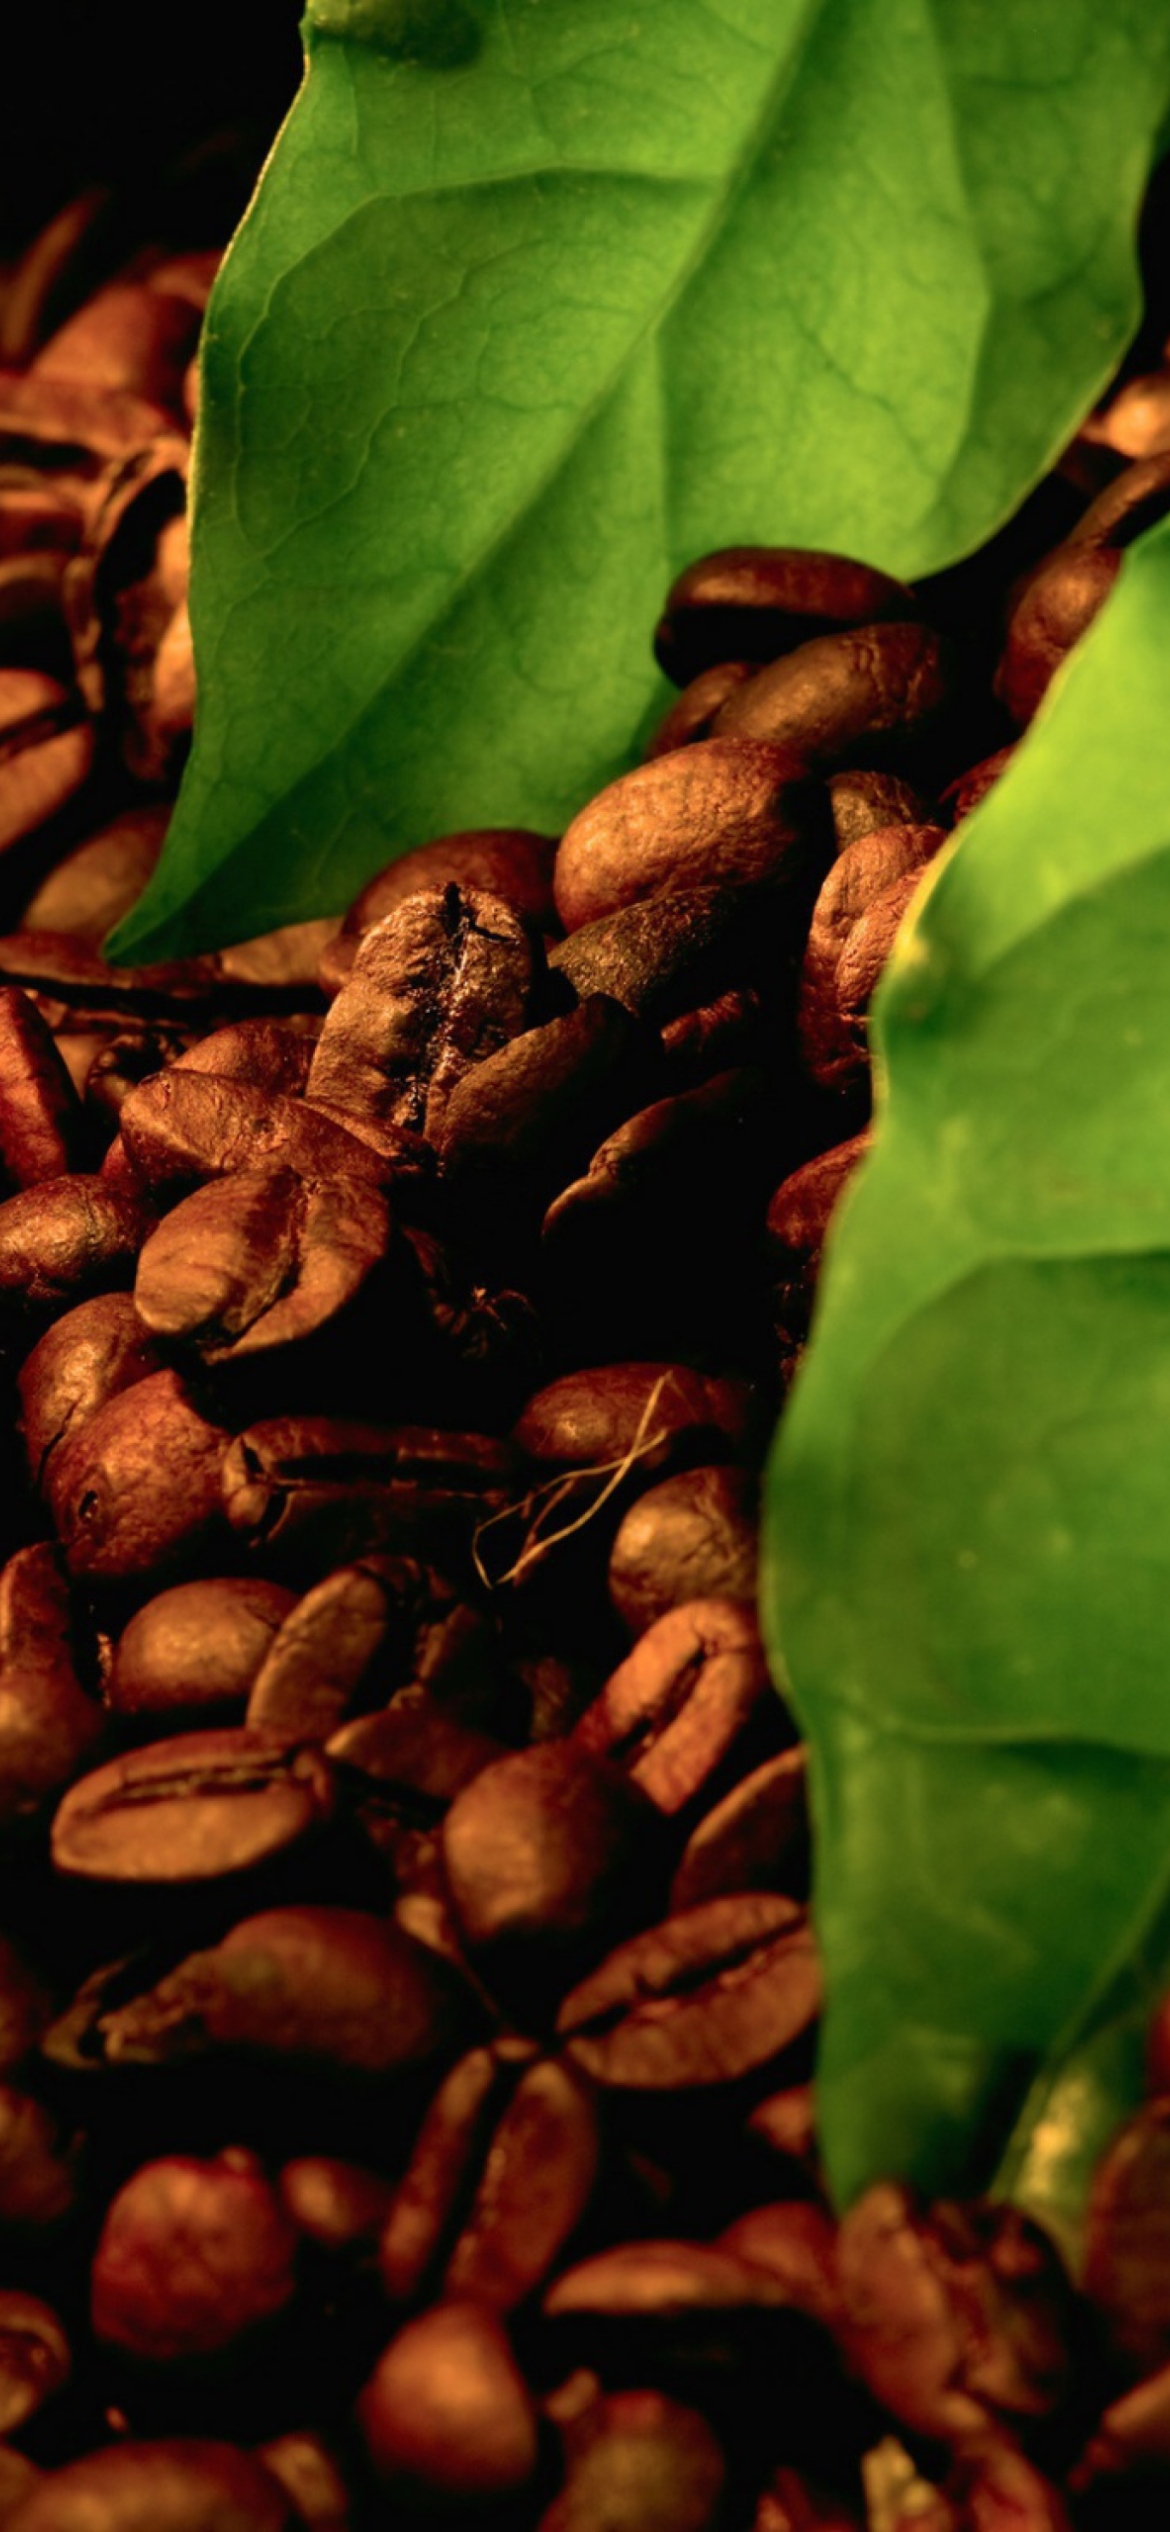 Coffee Beans And Green Leaves wallpaper 1170x2532